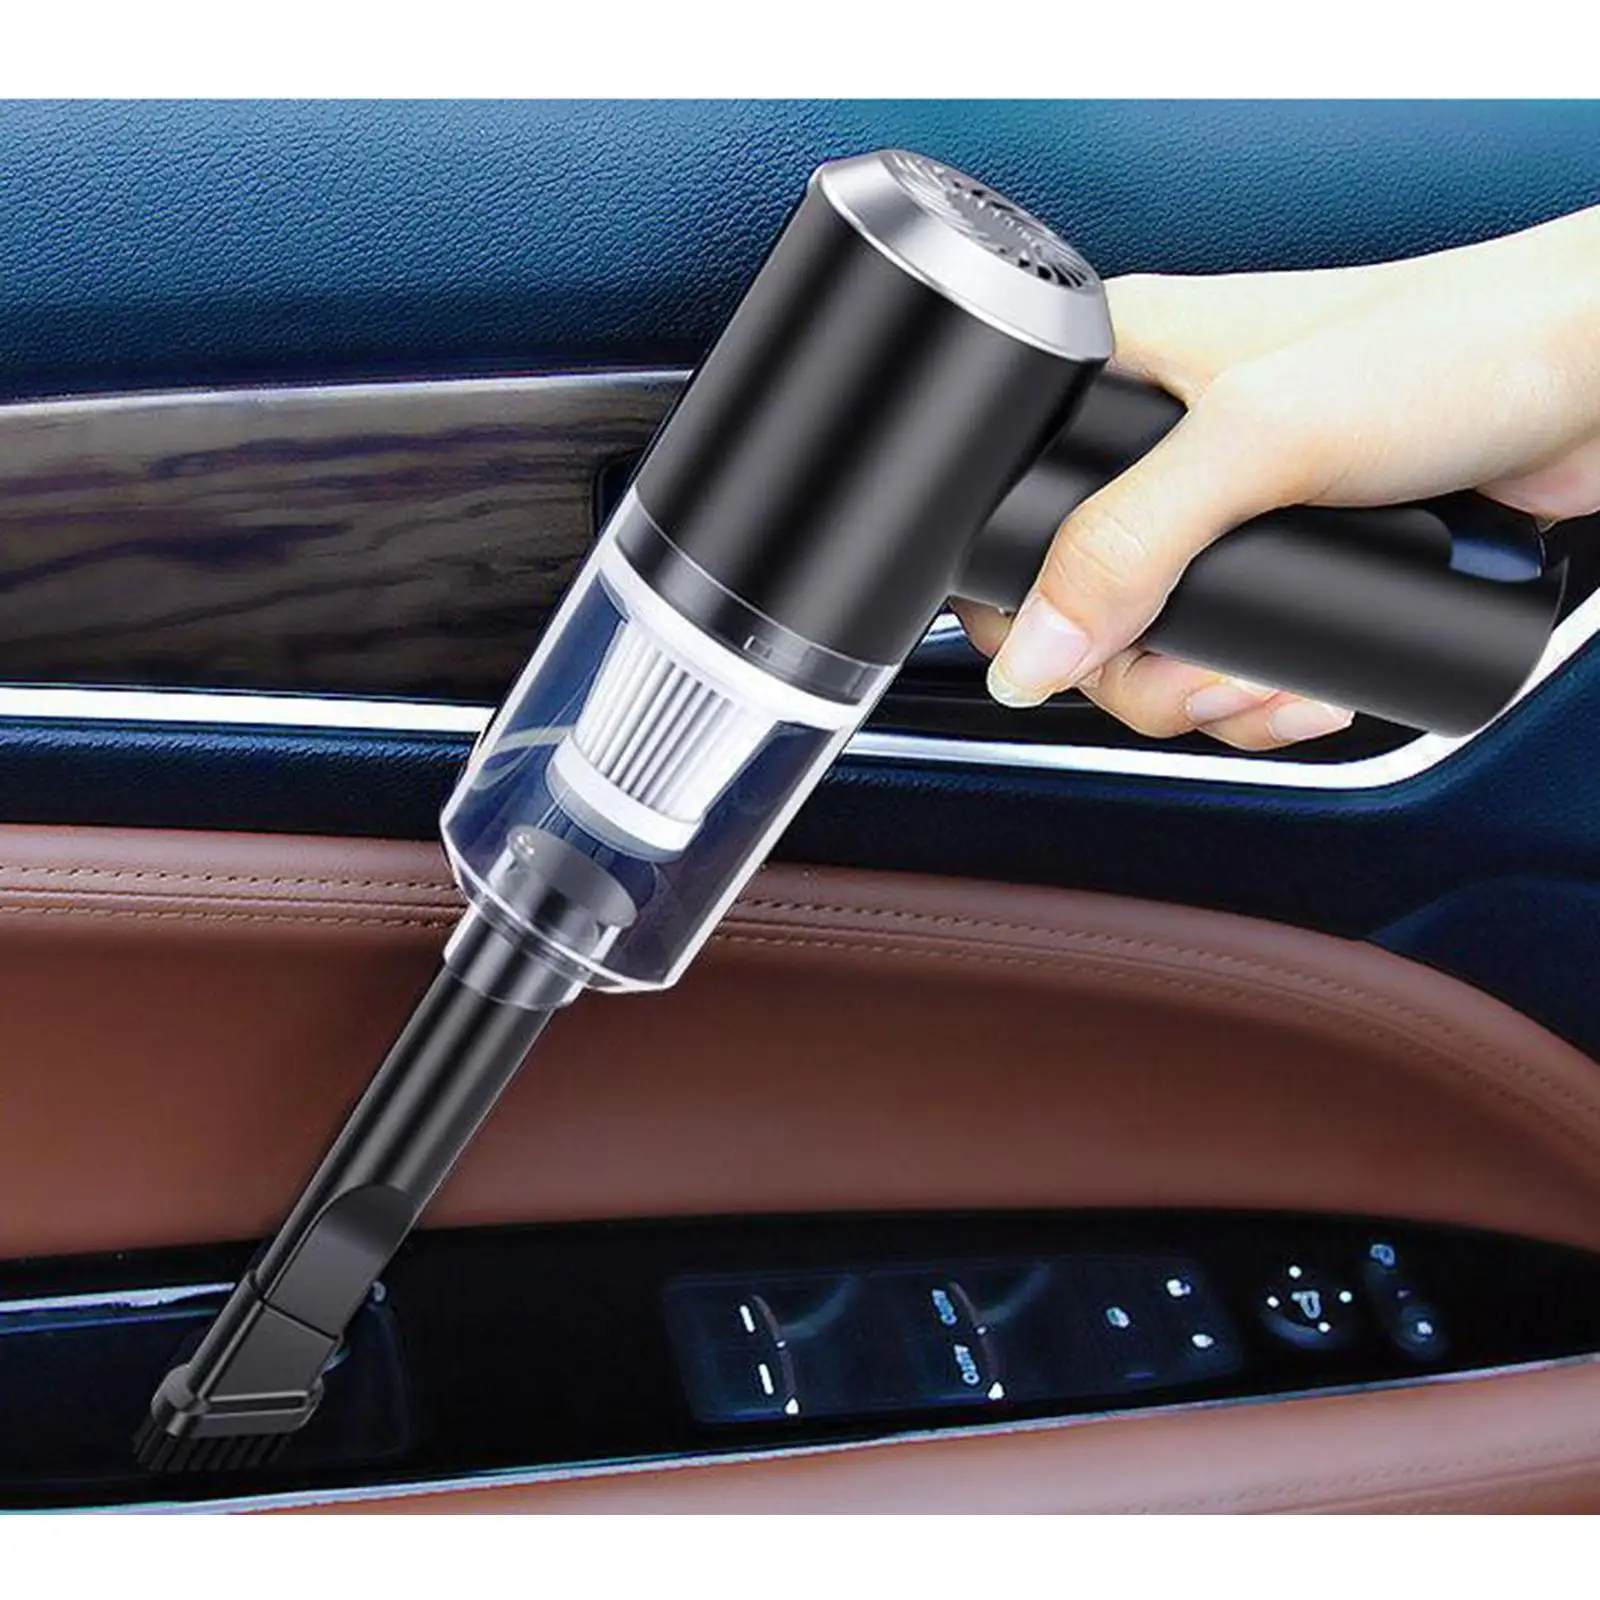 120W 5500pa Cordless Vacuum Cleaner Car Truck Duster Tool Wet & Dry Cleaning, with Washable HEPA Filter